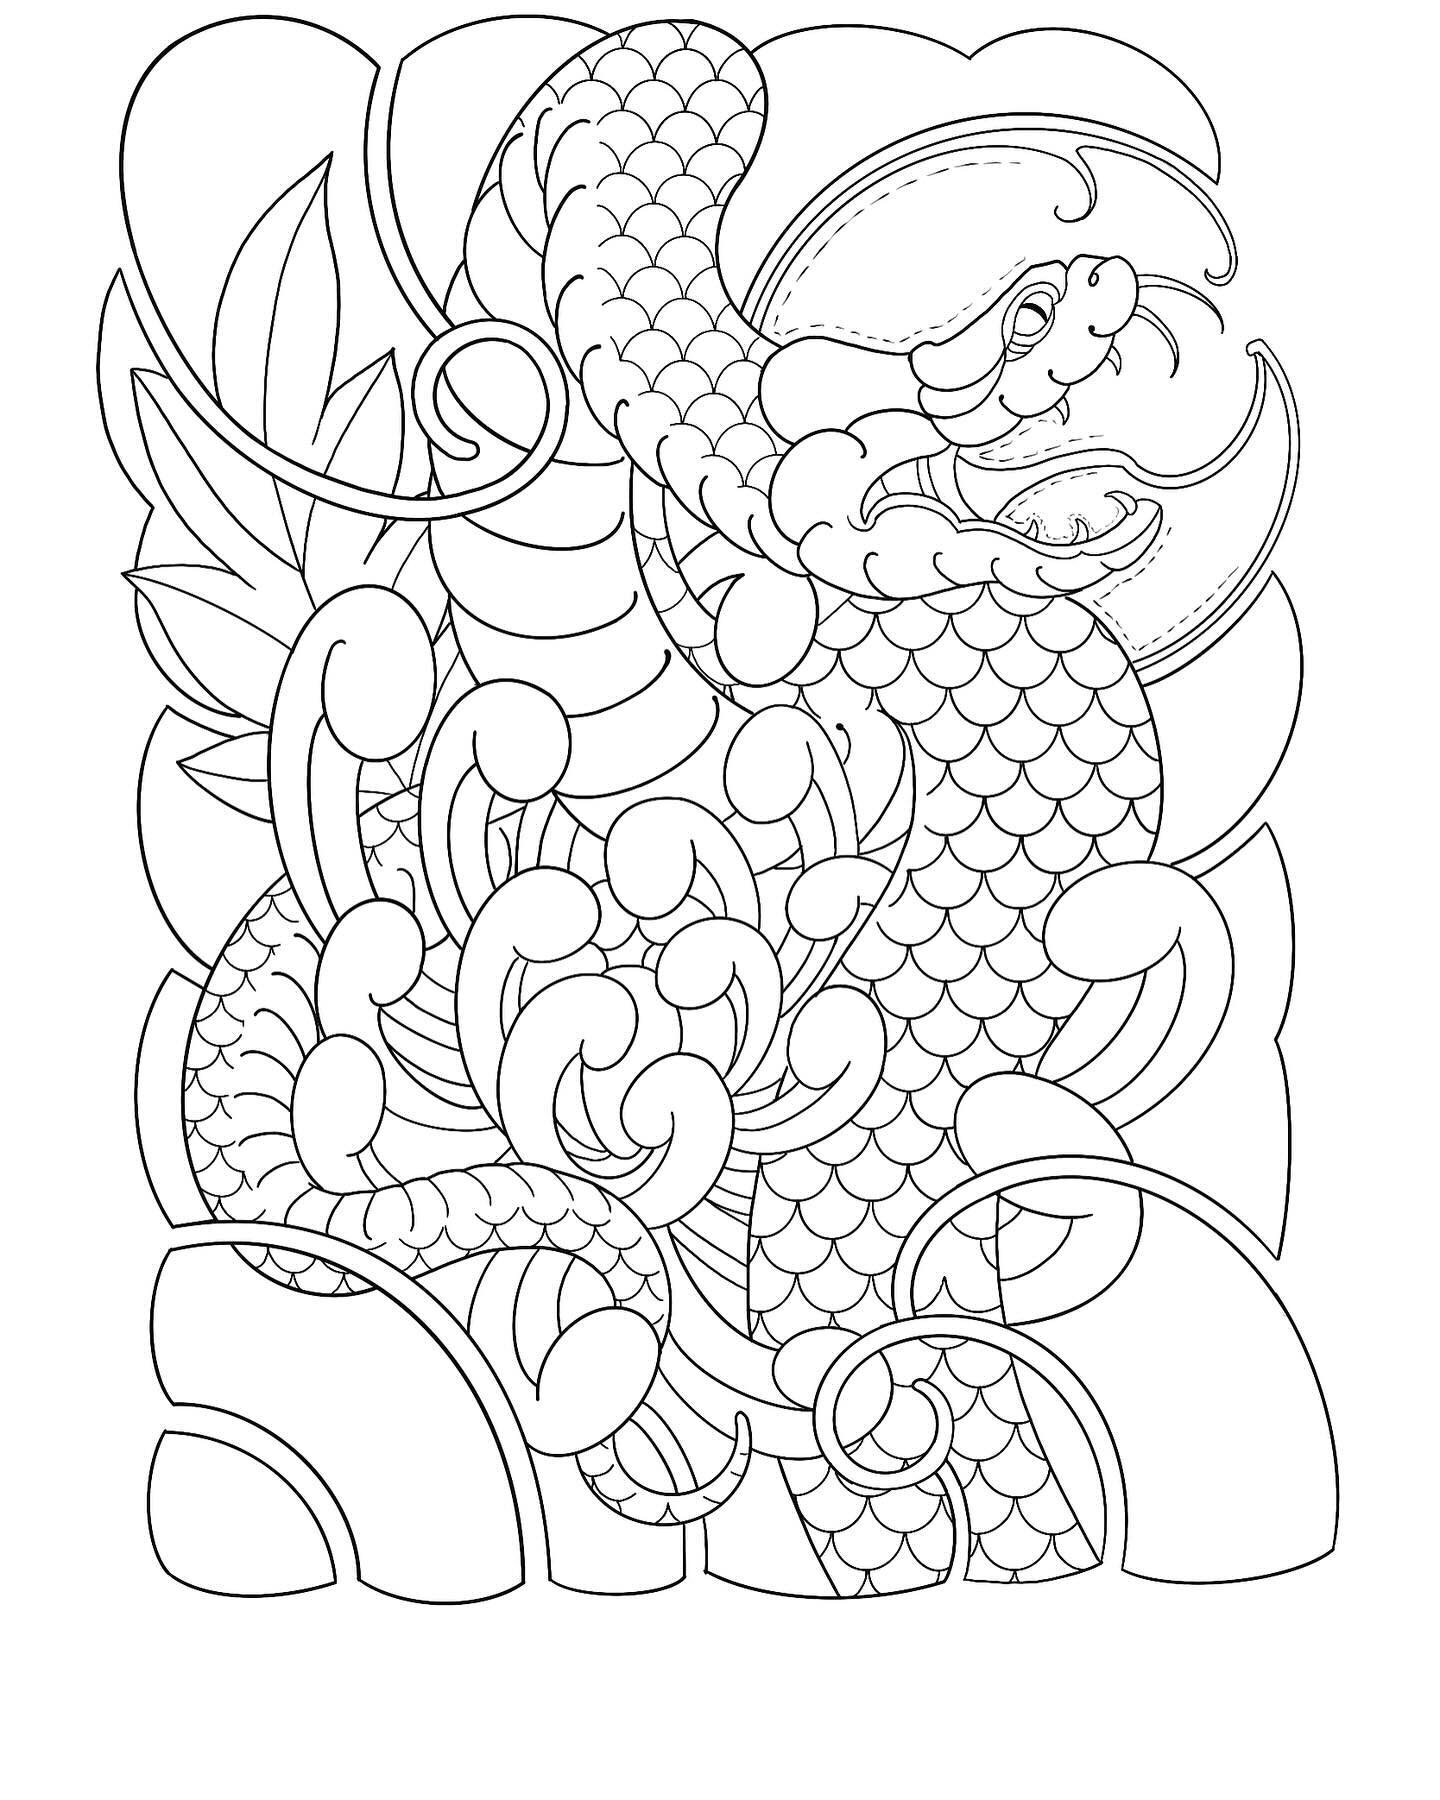 Drew this really cool Japanese traditional snake that would make for a dope tattoo. If you are interested in this design just call @inkedarts or DM me for booking details. Thanks for looking!!!! #newtattoo #snaketattoo #traditionaltattoo #tattoodesig